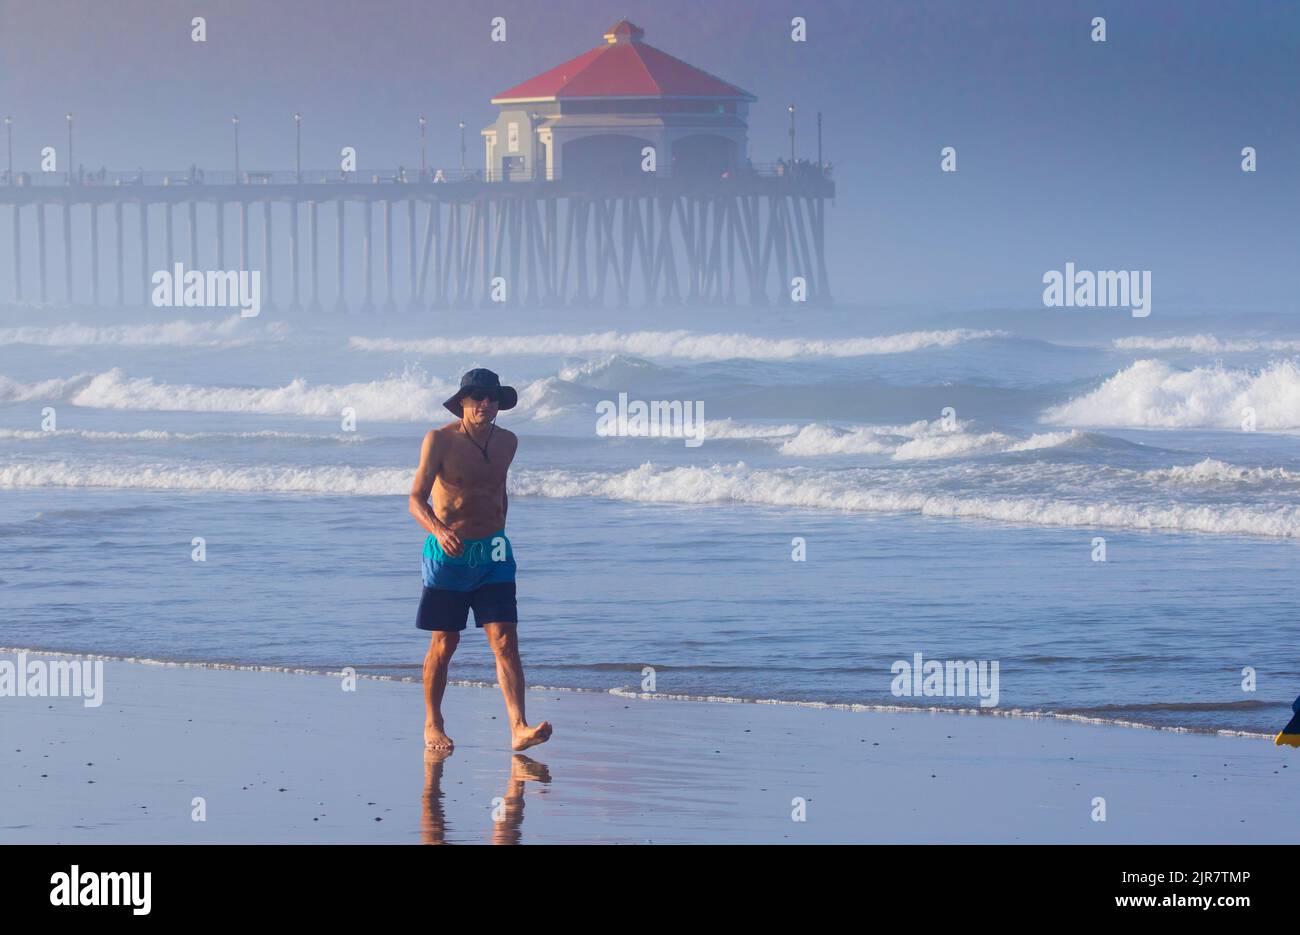 Man walking along the sand at Huntington Beach California wearing a hat and pair of shorts early in the morning with the pier in the background mist . Stock Photo